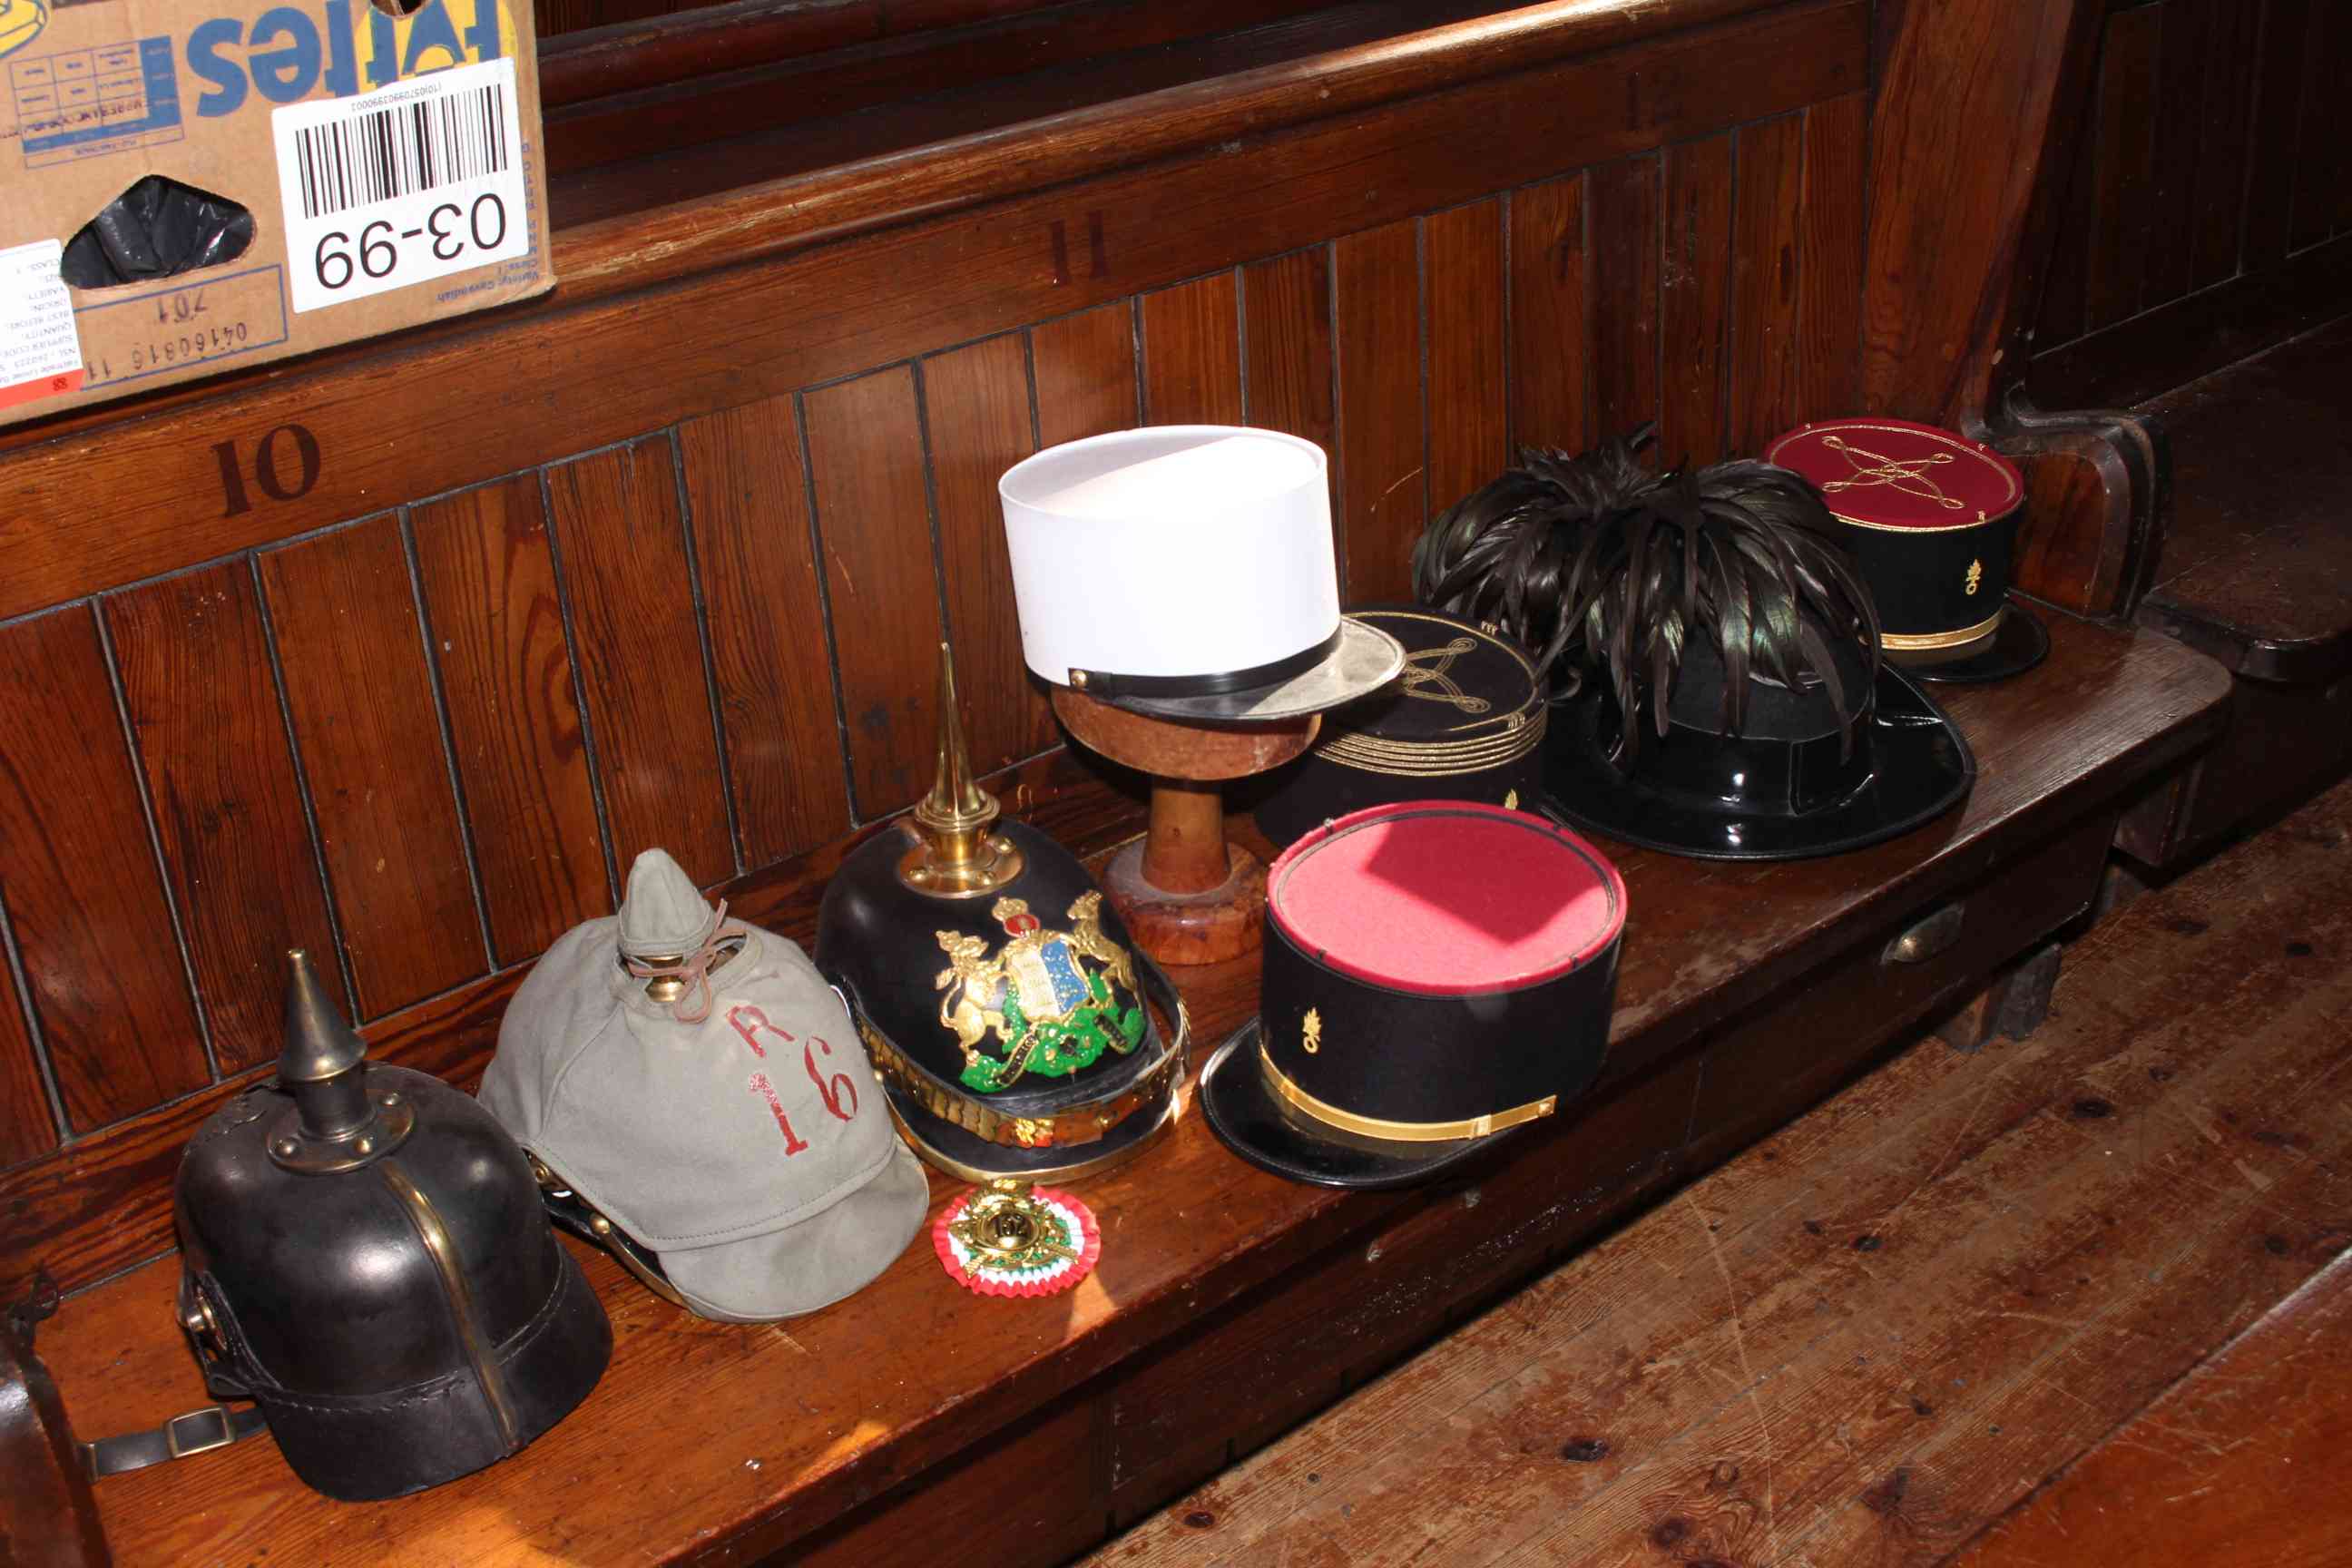 Collection of hats including military style, etc.